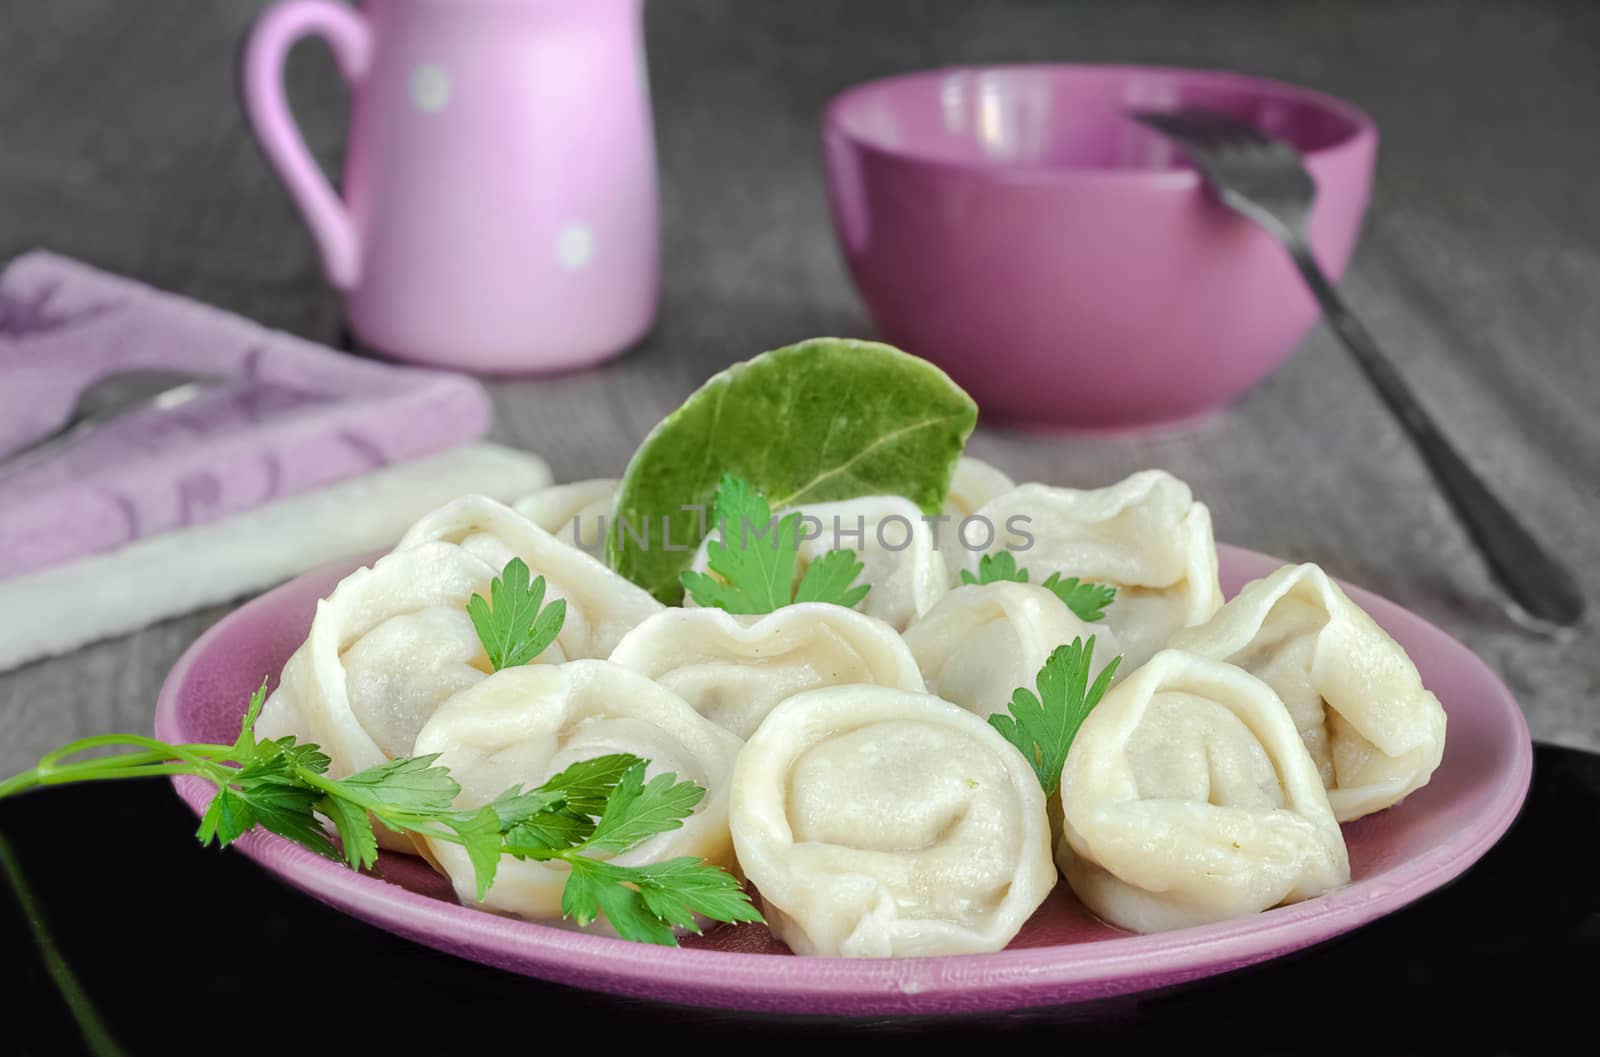 Dumplings on a plate. Black surface, and selective focus. by Gaina